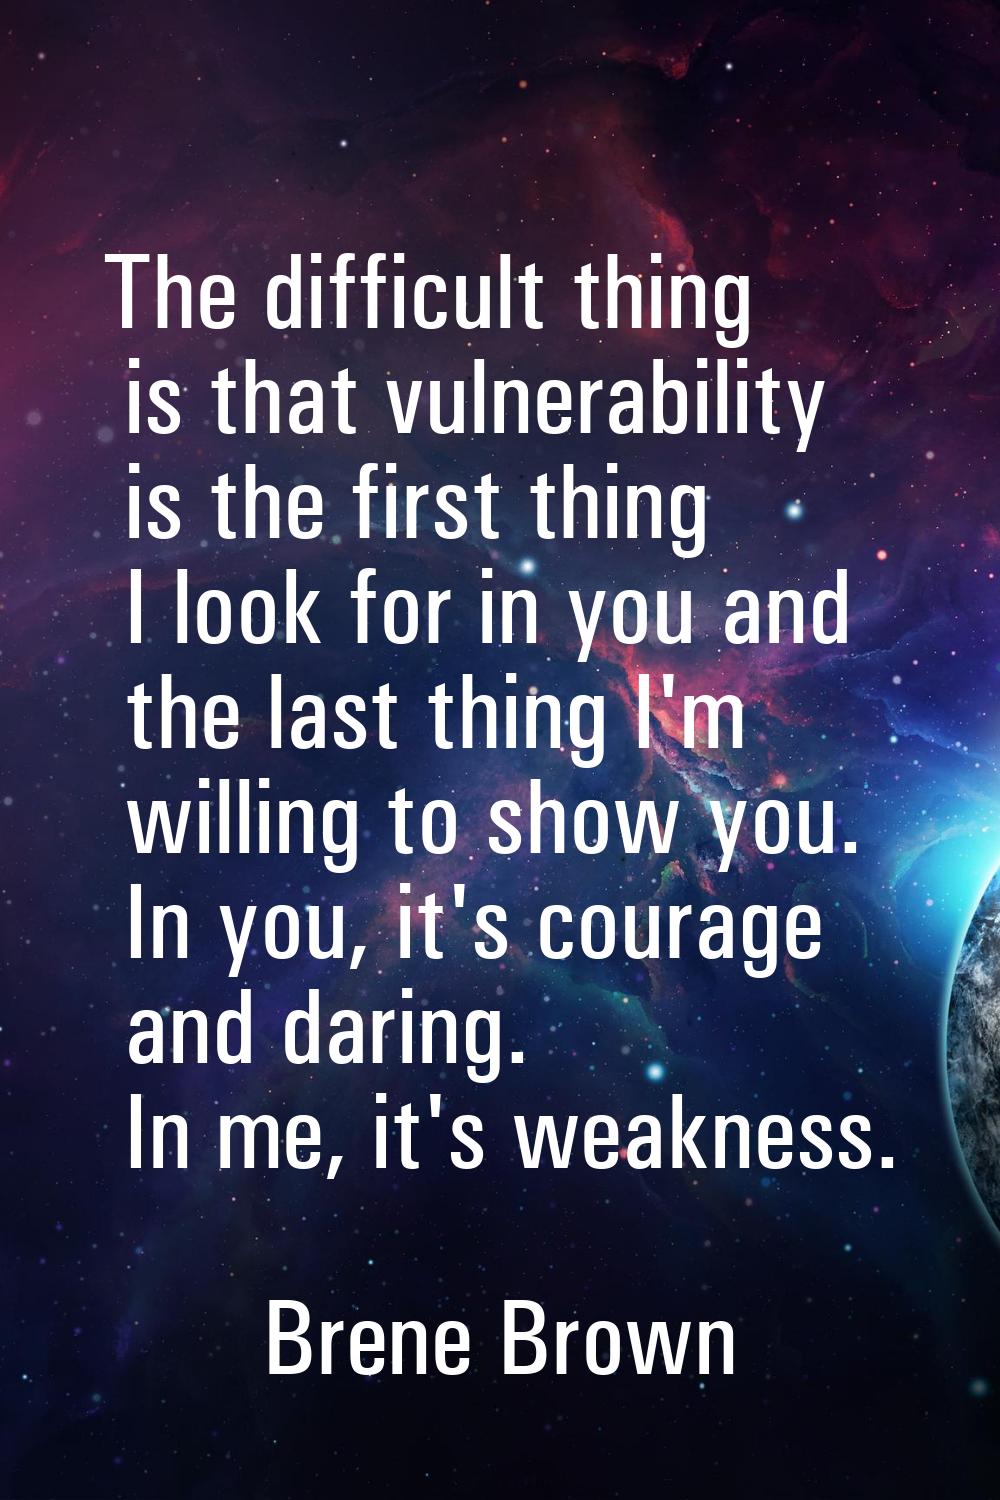 The difficult thing is that vulnerability is the first thing I look for in you and the last thing I